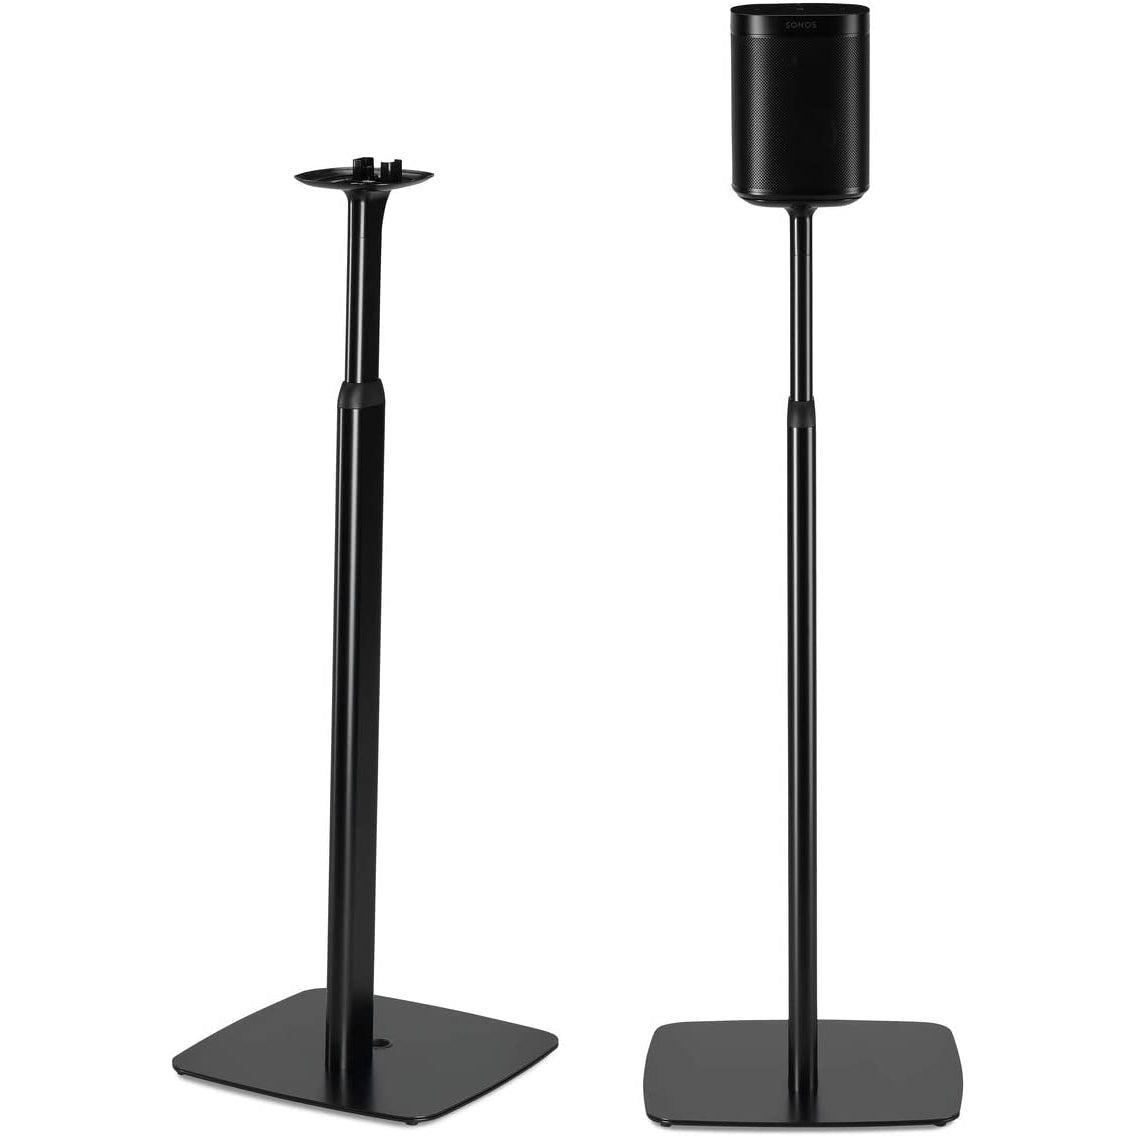 Flexson S1-FSX2 2 x Floor Stands for Sonos One, One SL and Play:1